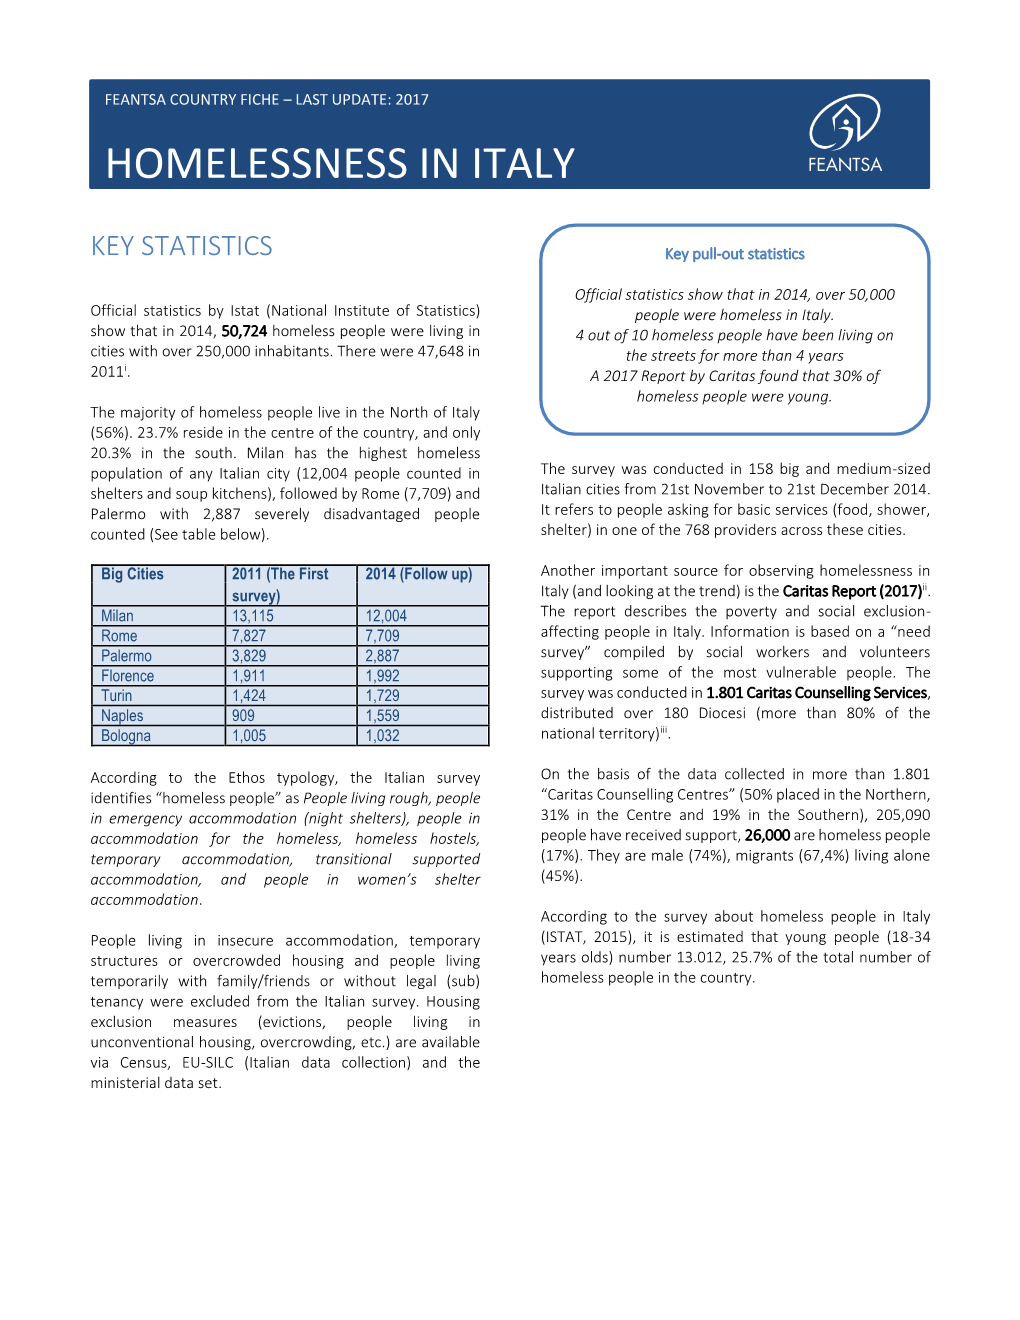 Homelessness in Italy